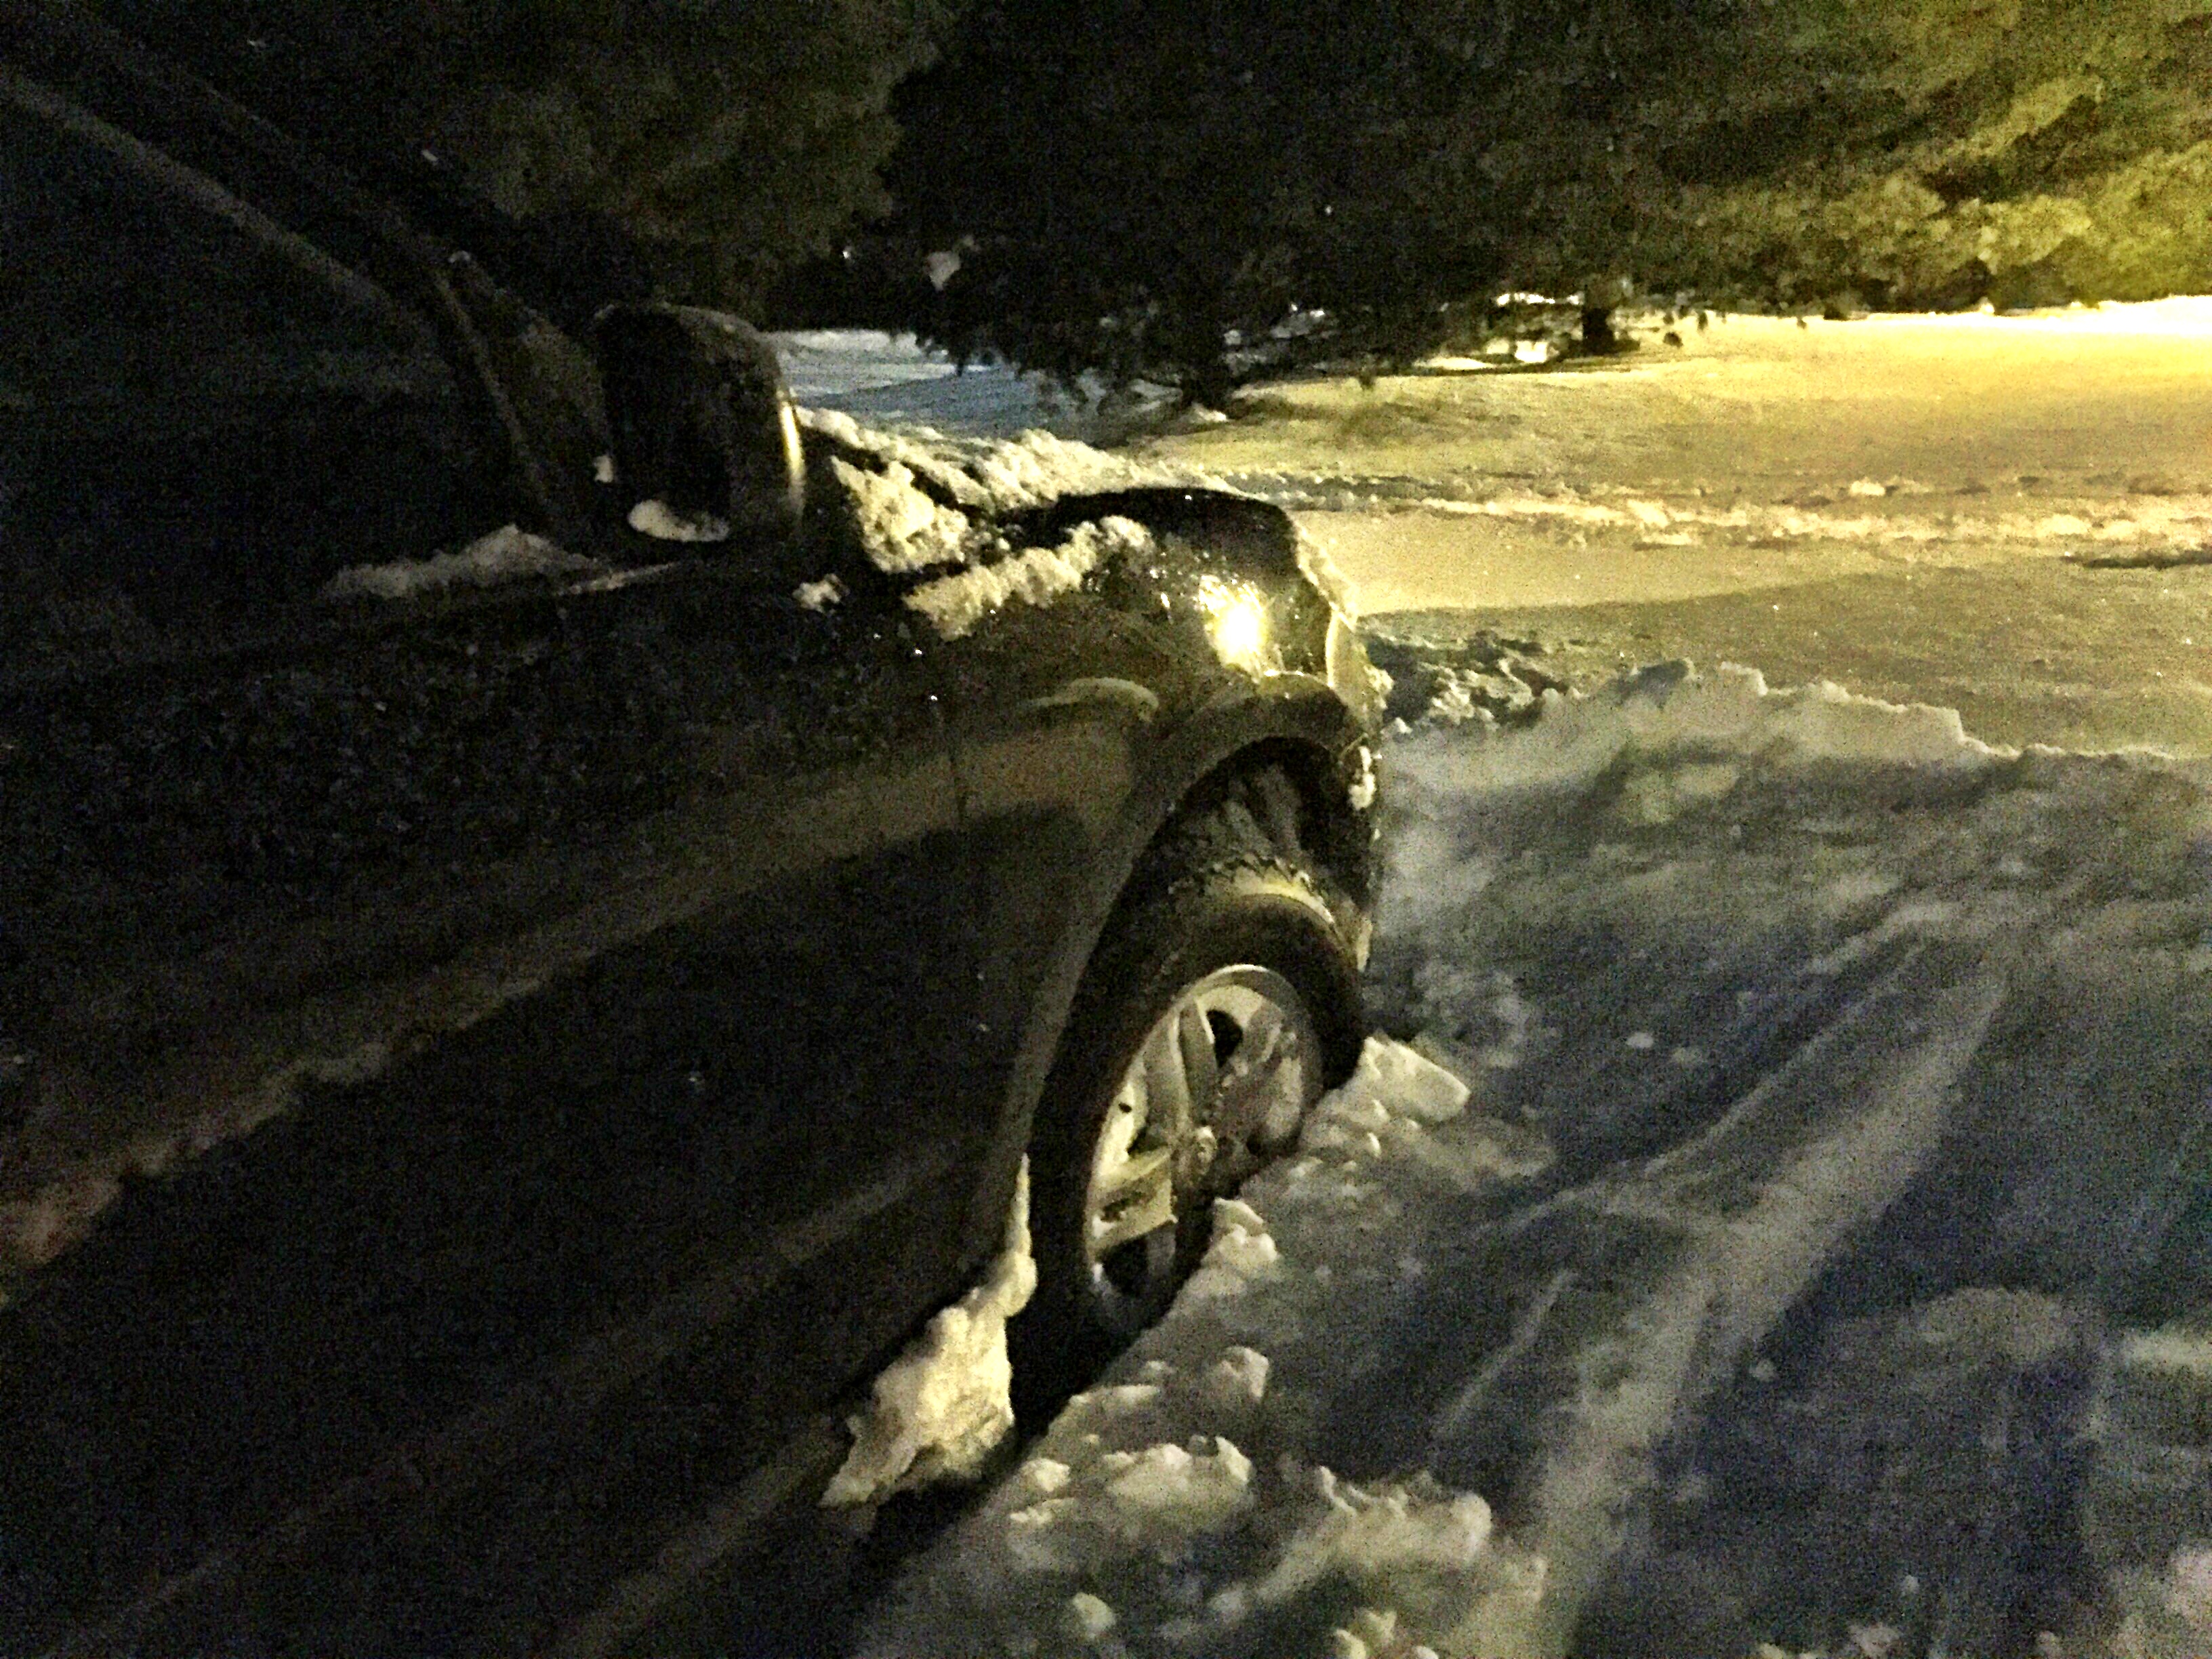 This morning, I was that jerk whose 4-wheel drive didn’t save him